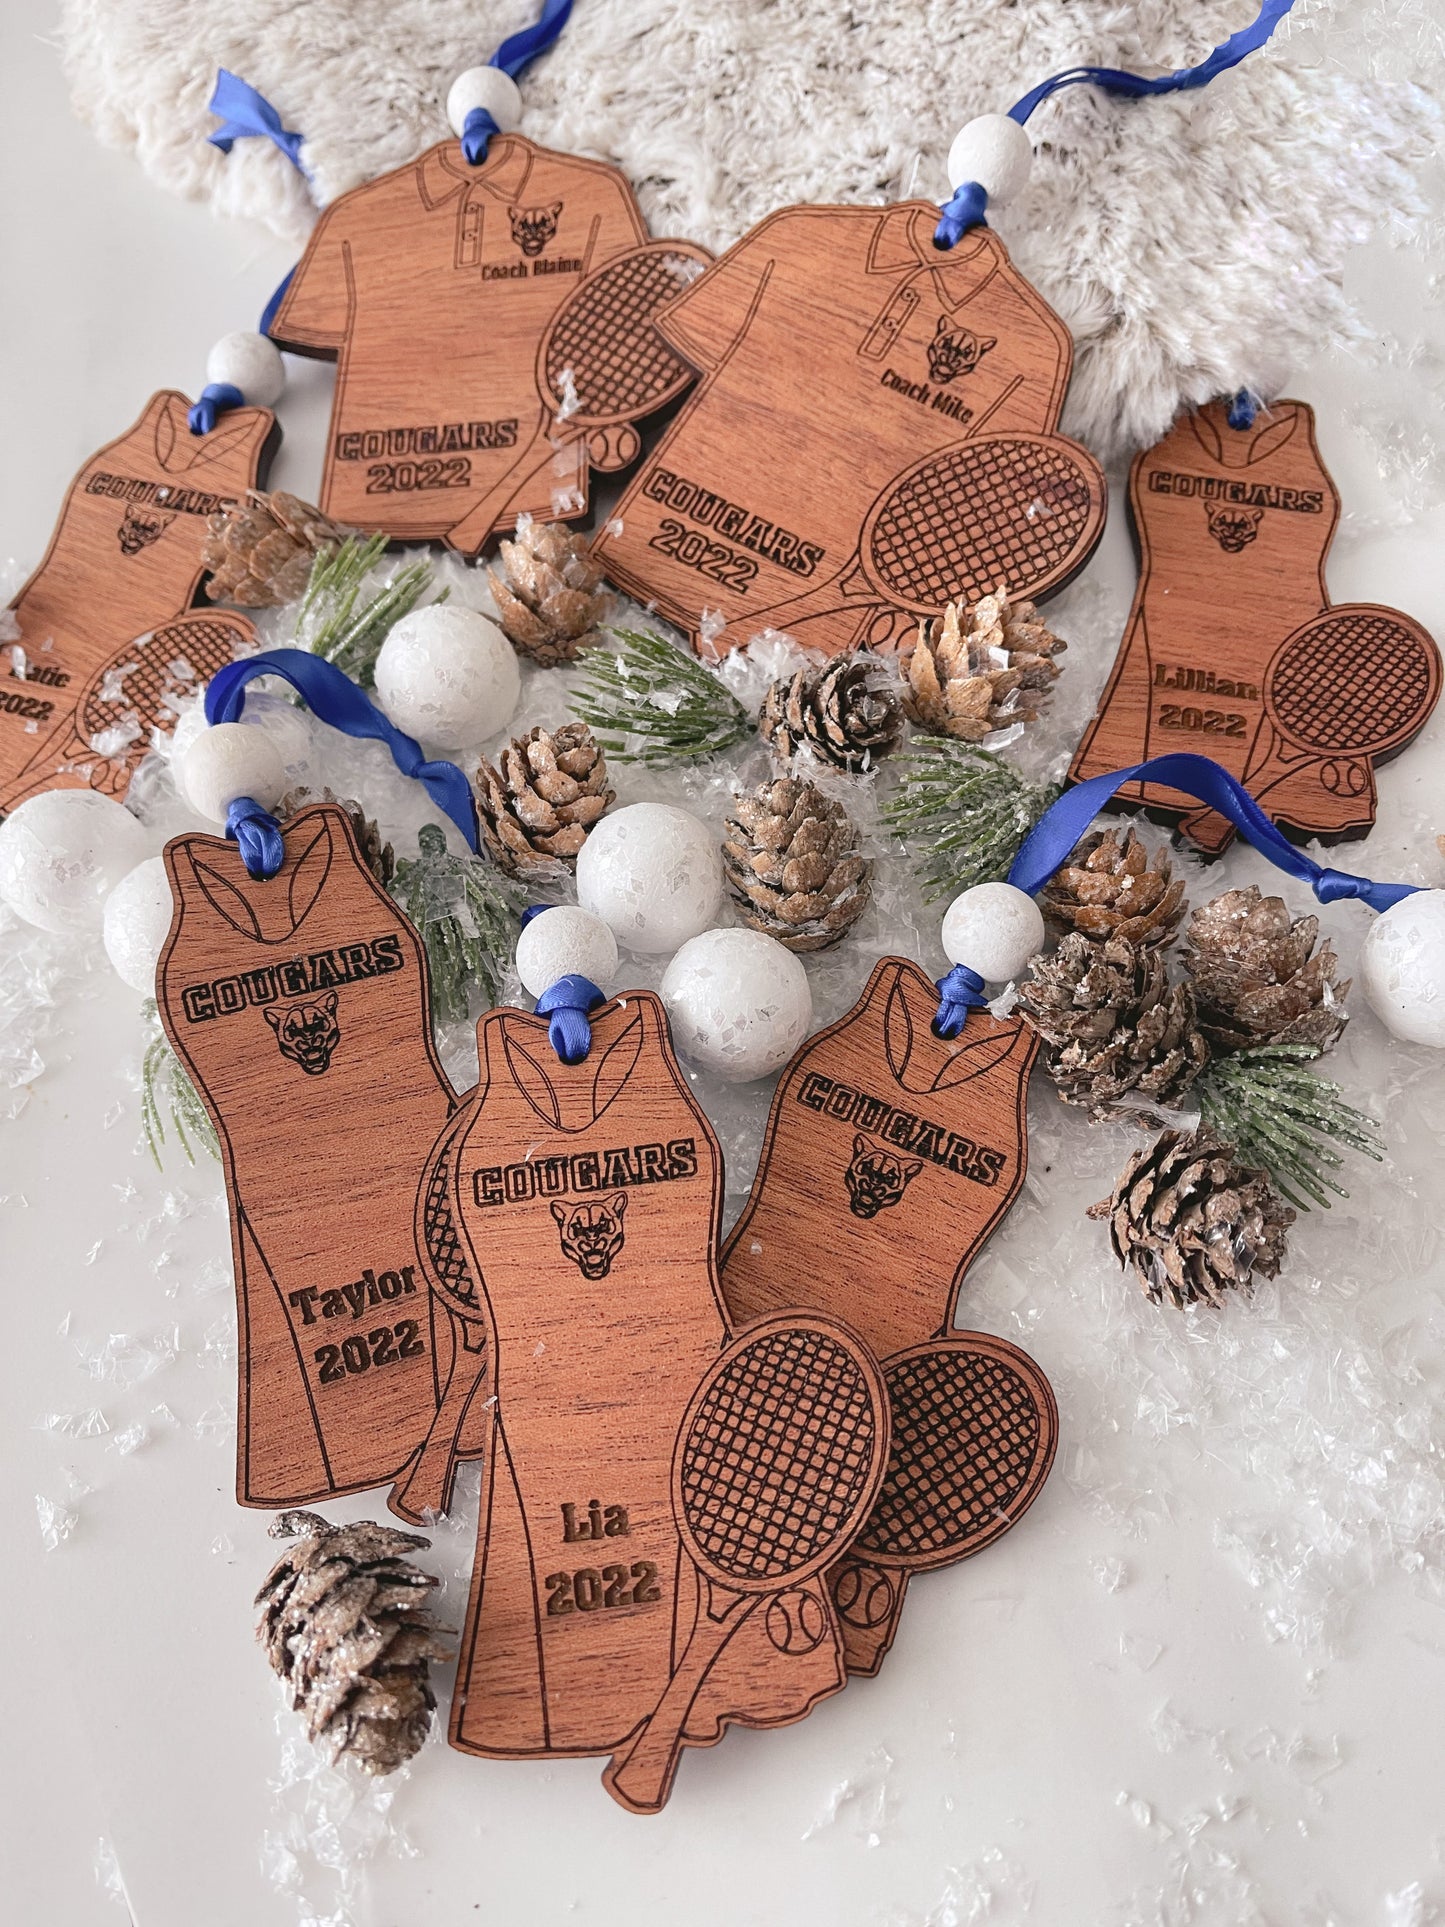 Personalized Tennis Ornament - Male & Female options